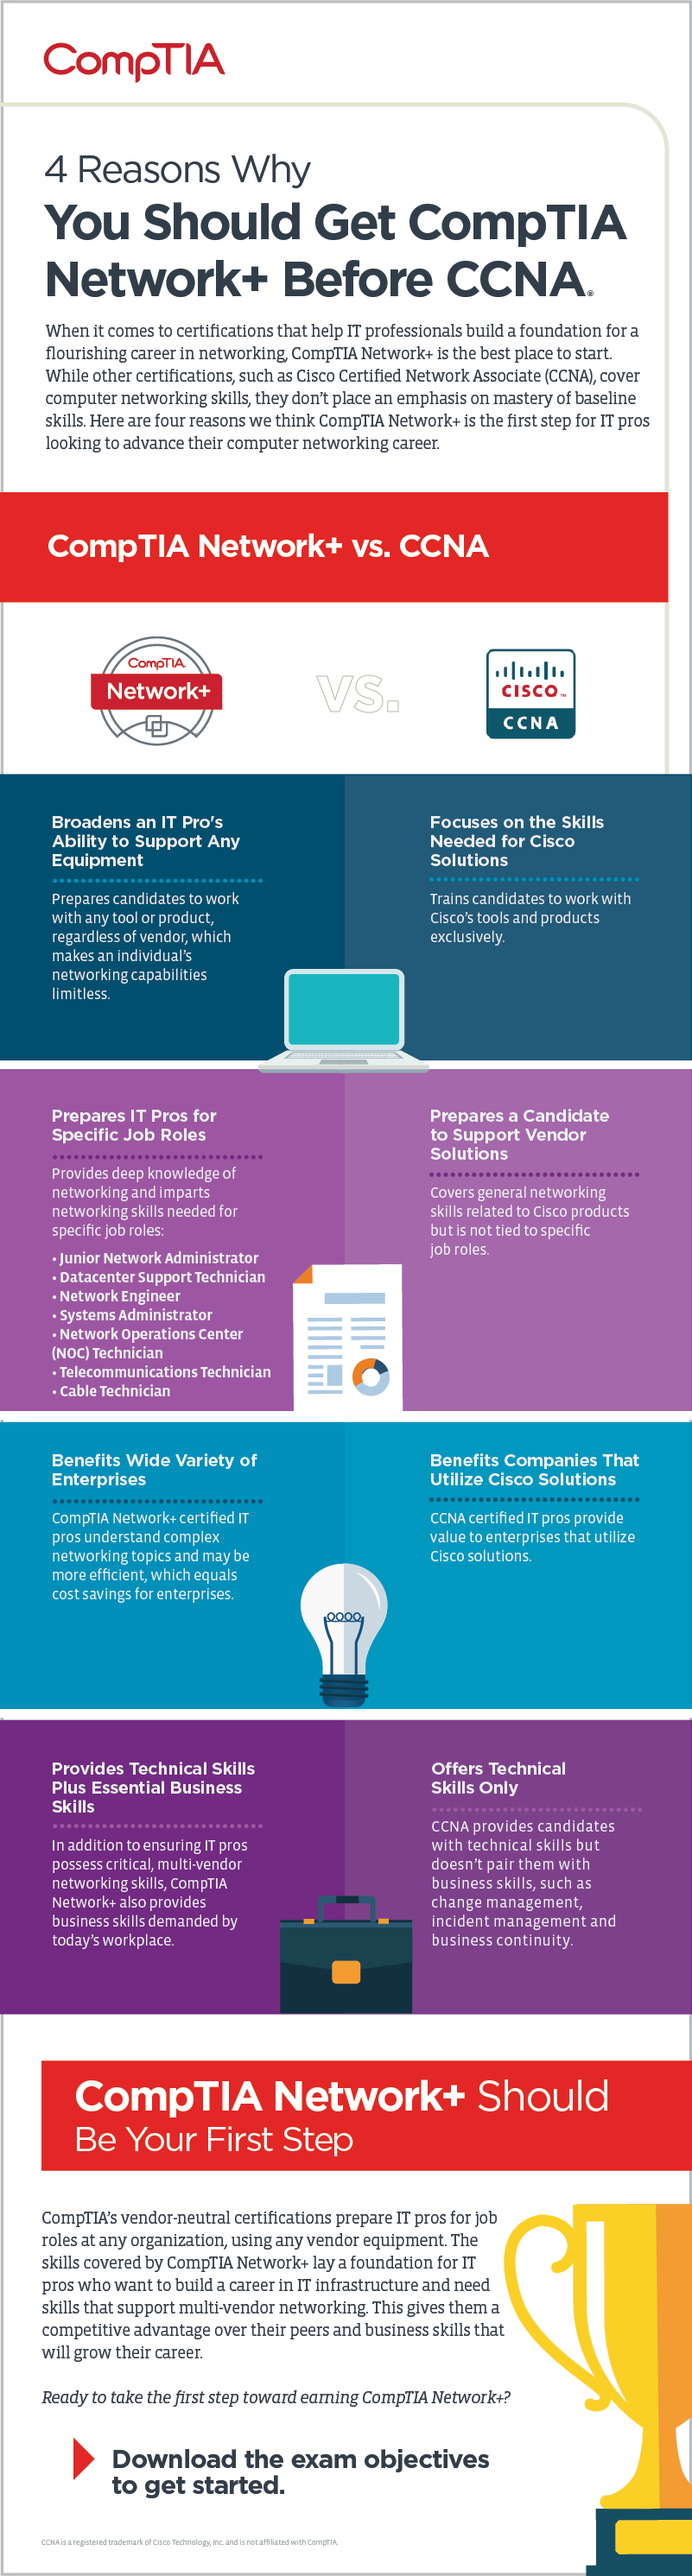 08914 Network+ vs CCNA infographic Updated-01